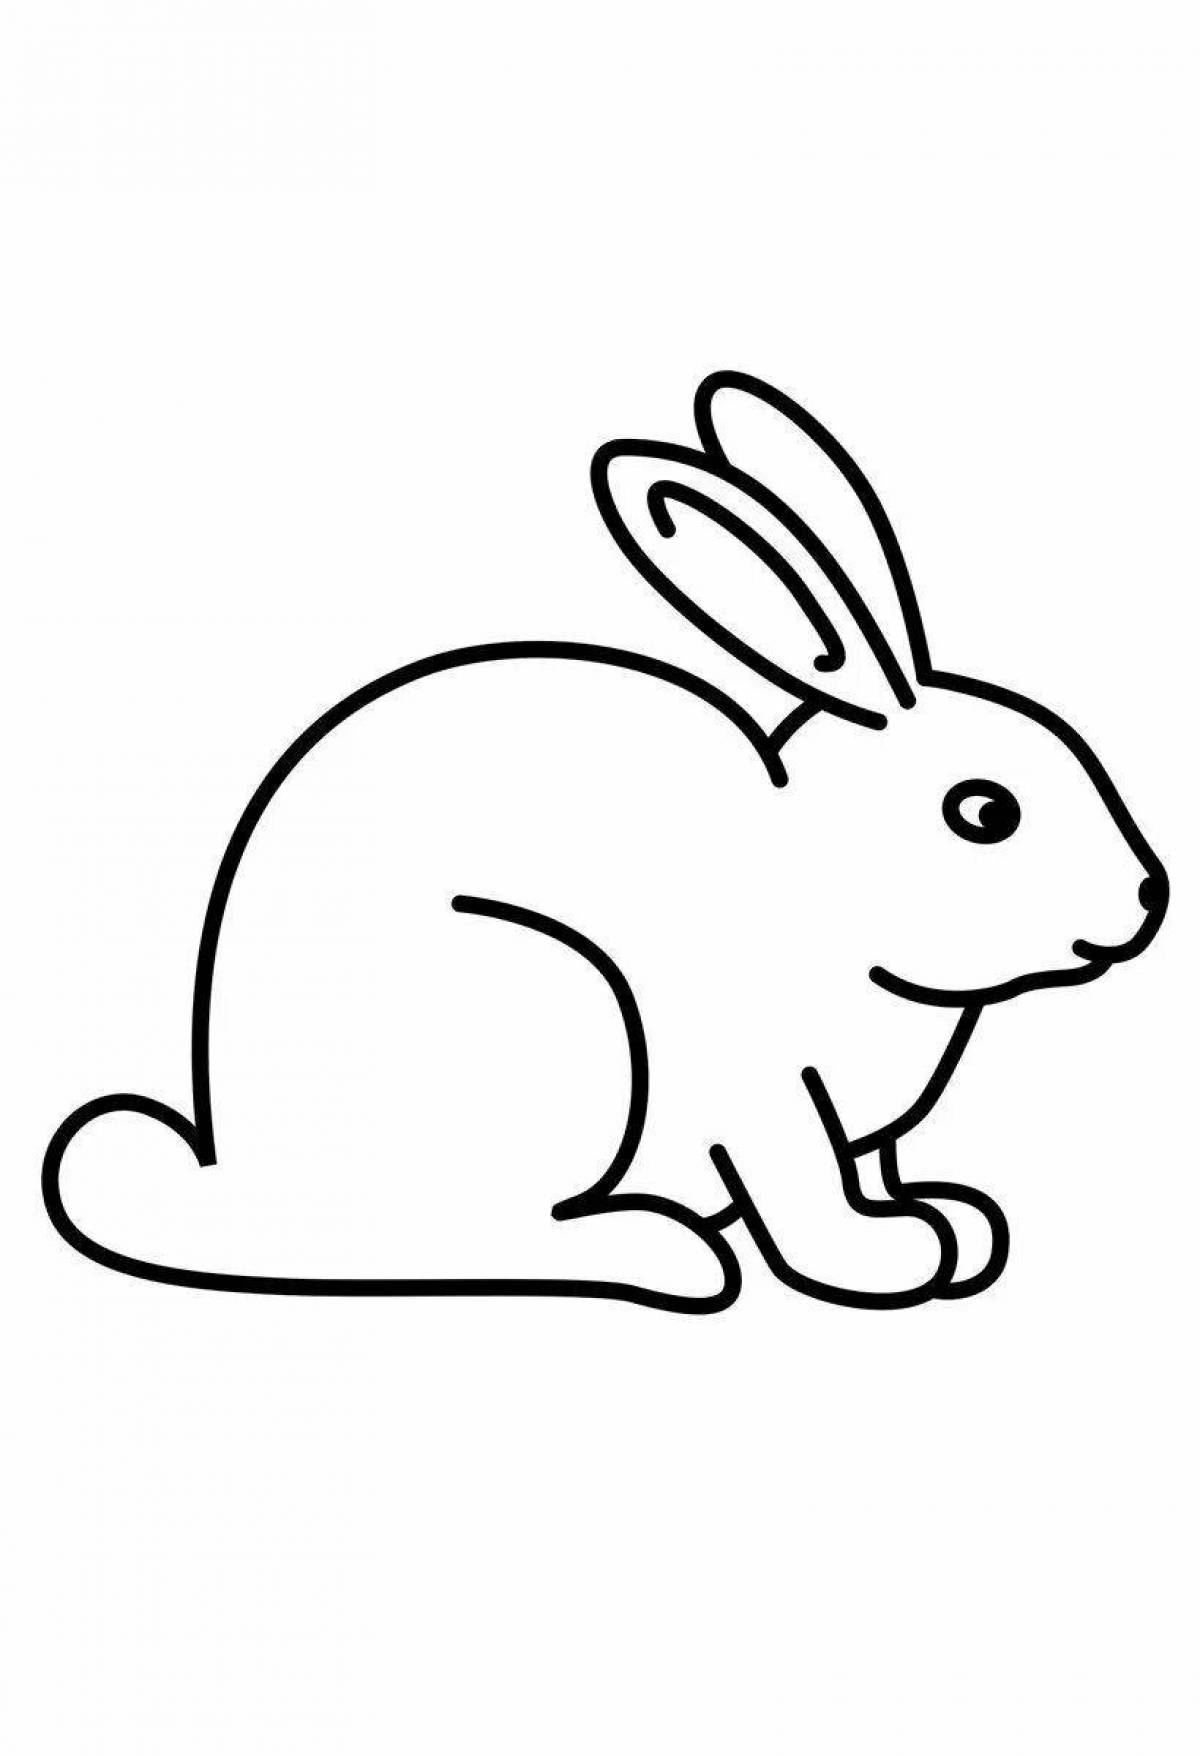 Calming hare drawing